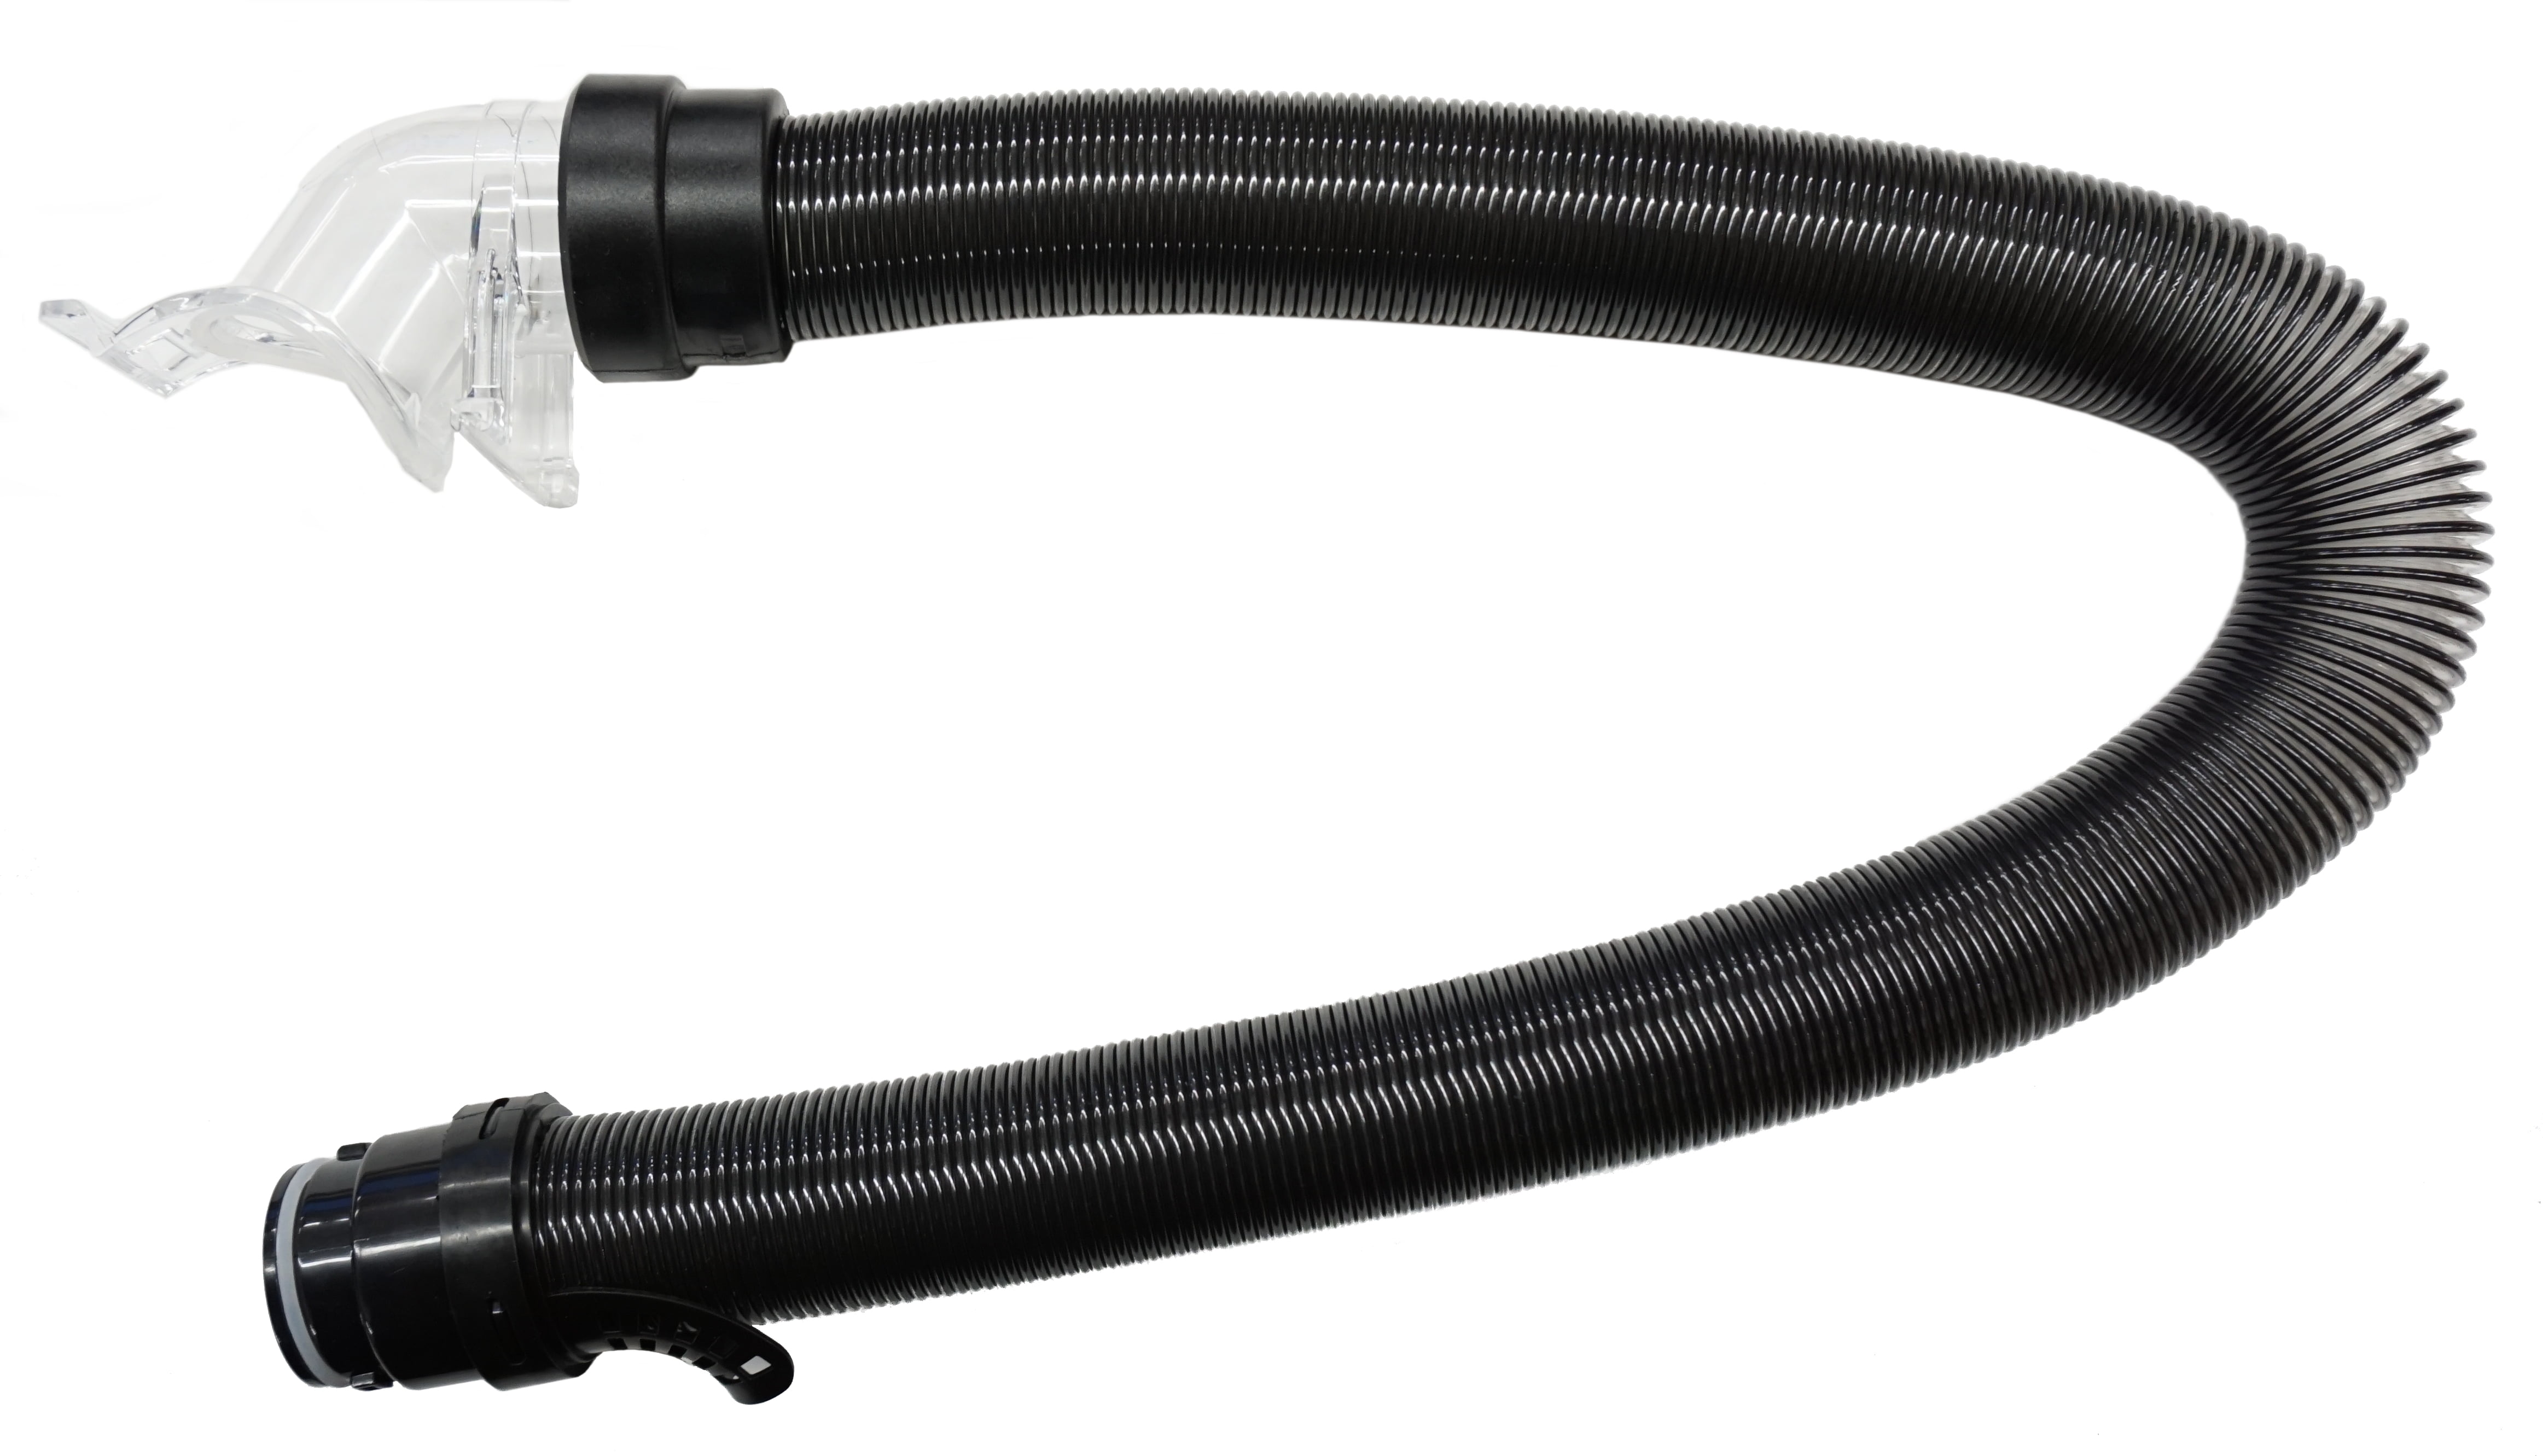 160-8846 Pet Hair Eraser Vacuum Hose With Cuffs & Elbow Bissell 1650 Model 